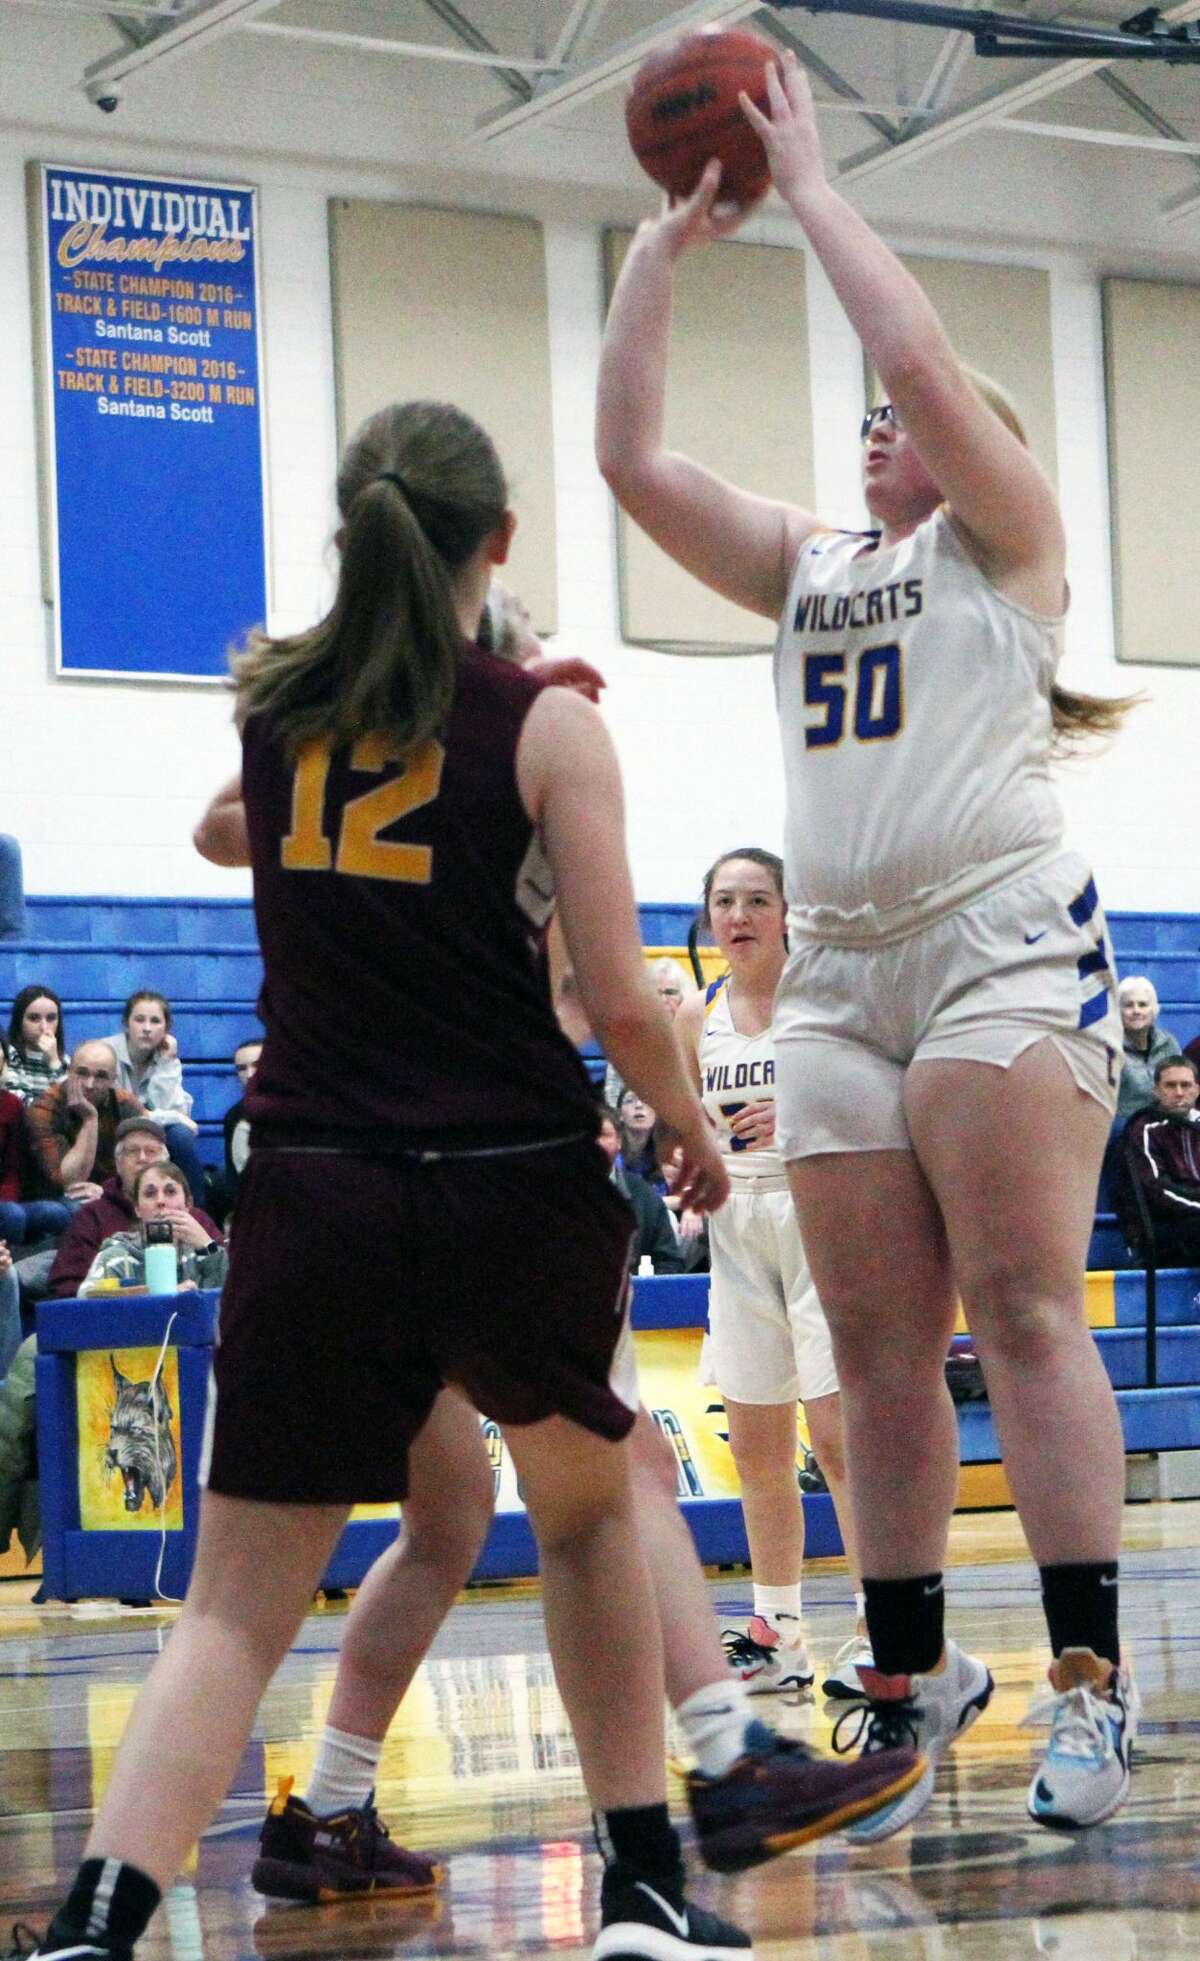 The Evart girls basketball team was dealt a 50-33 loss at the hands of McBain NMC Christian on Thursday evening. Junior Addy Gray paced the Wildcats with 14 points. 